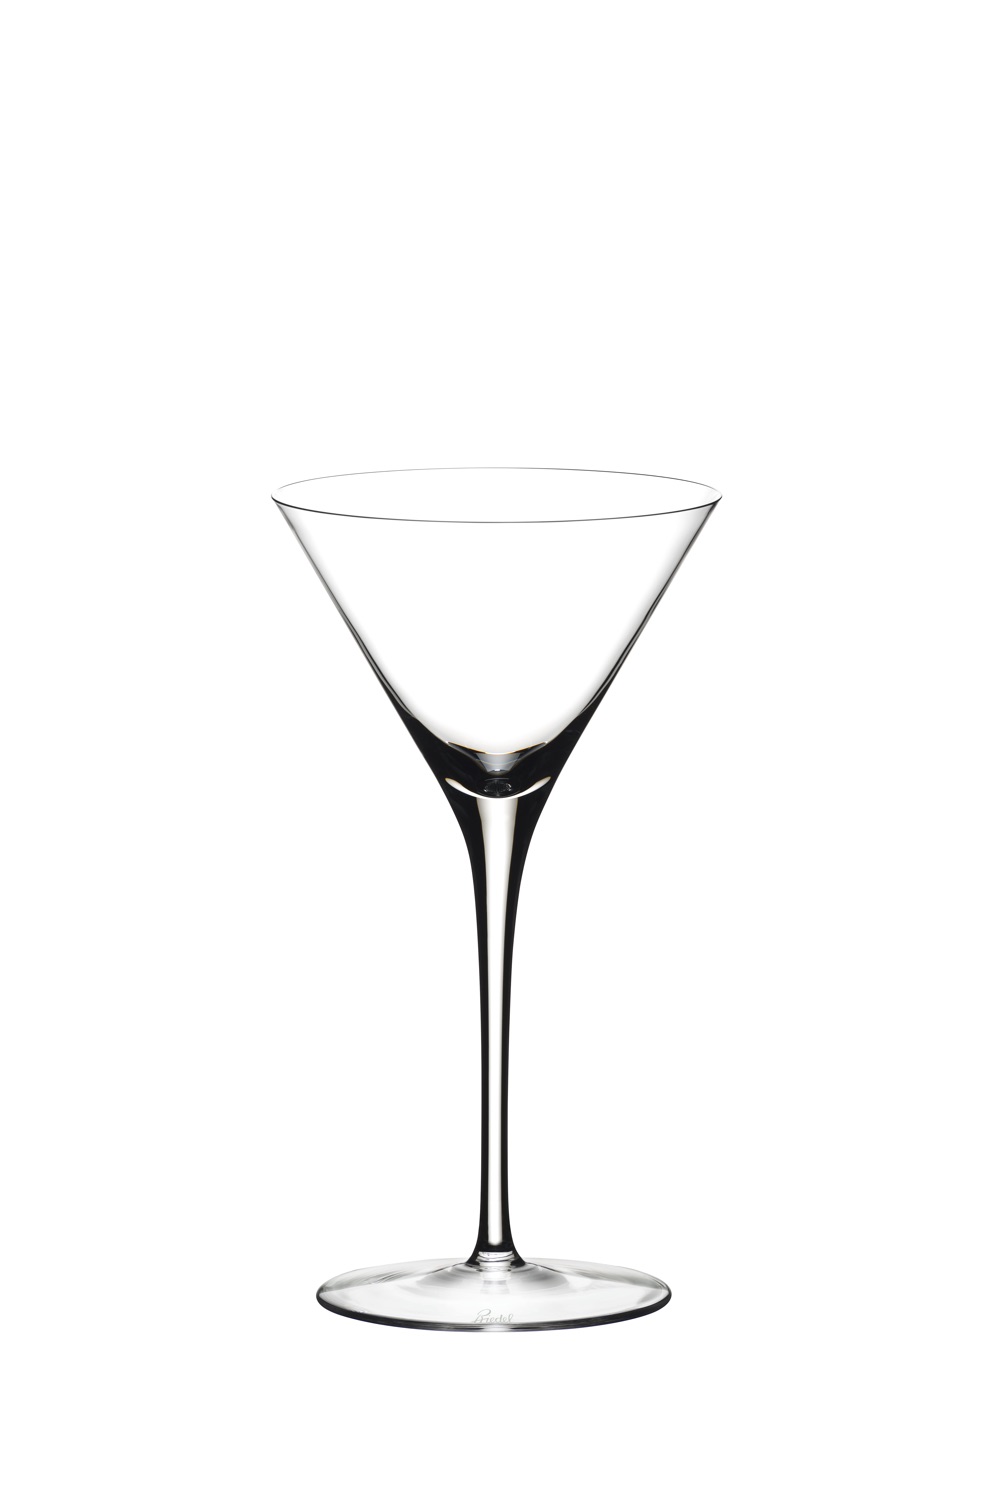 Sommeliers Martini Sommeliers Riedel